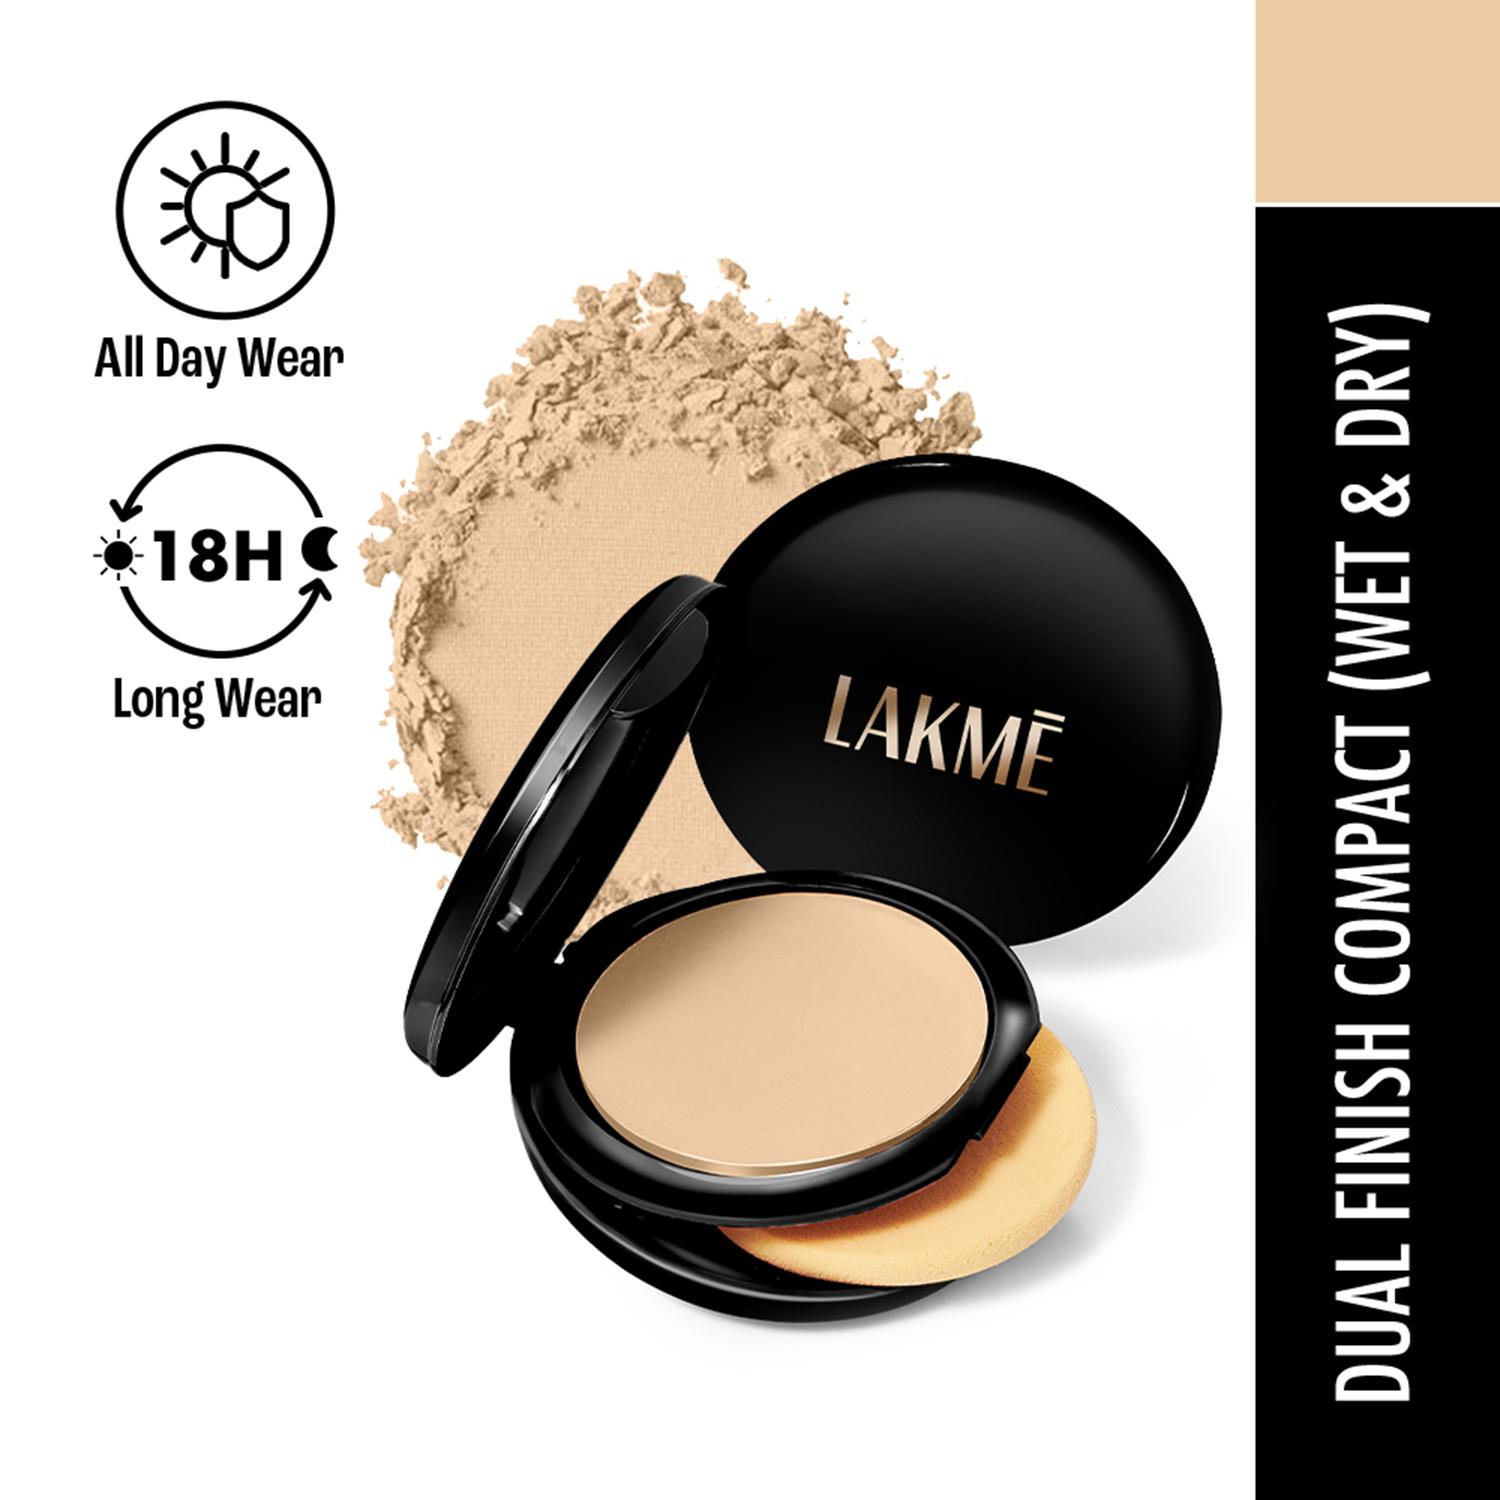 Lakme | Lakme Xtraordin-airy Compact 2 In 1 Compact + Foundation Lightweight SPF17 01 Ivory Fair (9 g)